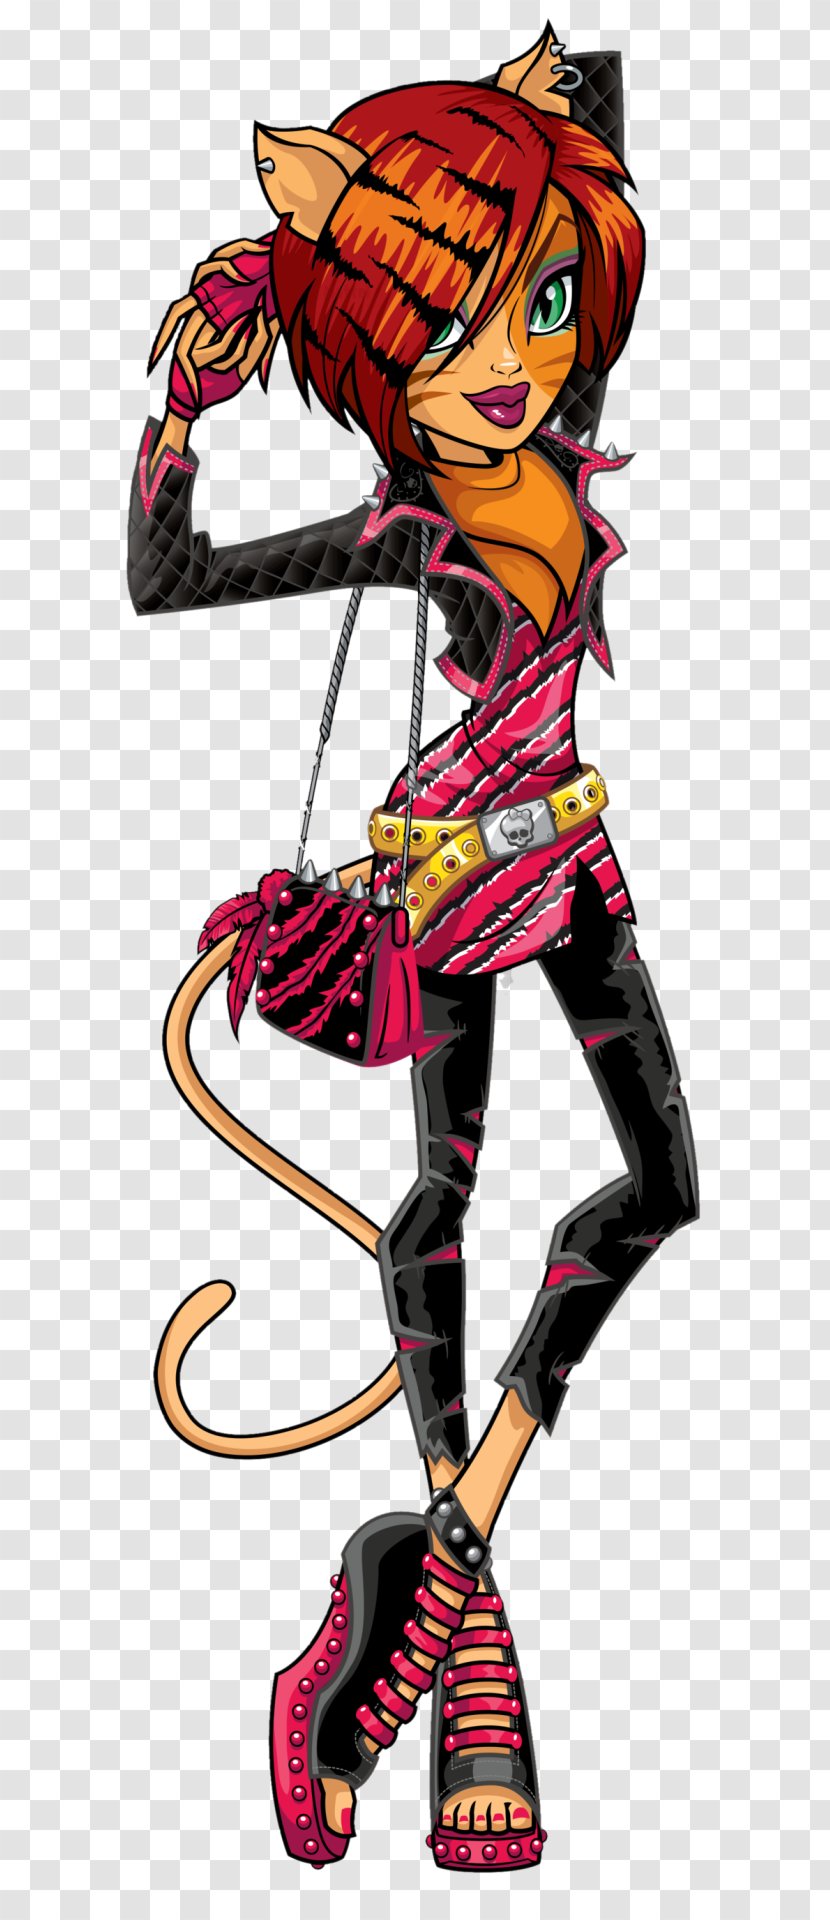 Monster High Freak Du Chic Toralei Doll Frankie Stein - Fictional Character Transparent PNG